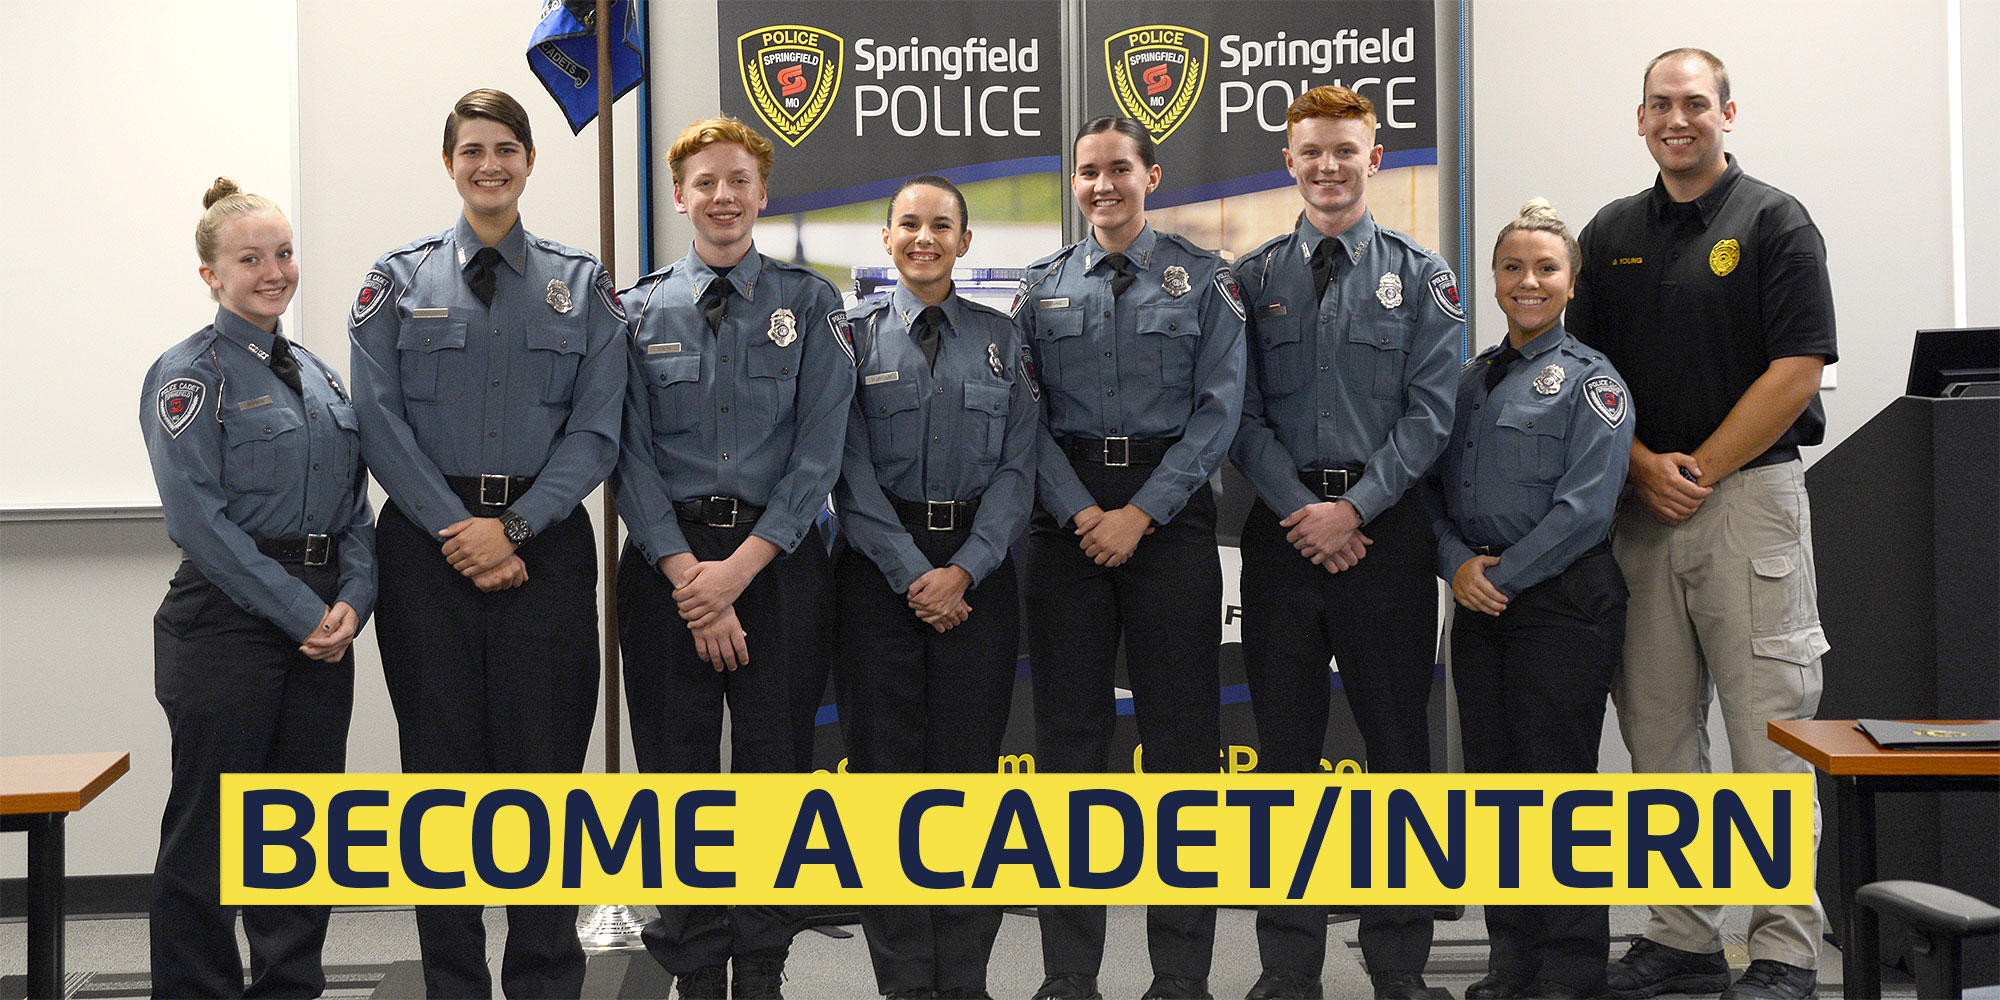 group photo of seven police cadets with instructor and text: become a cadet / intern